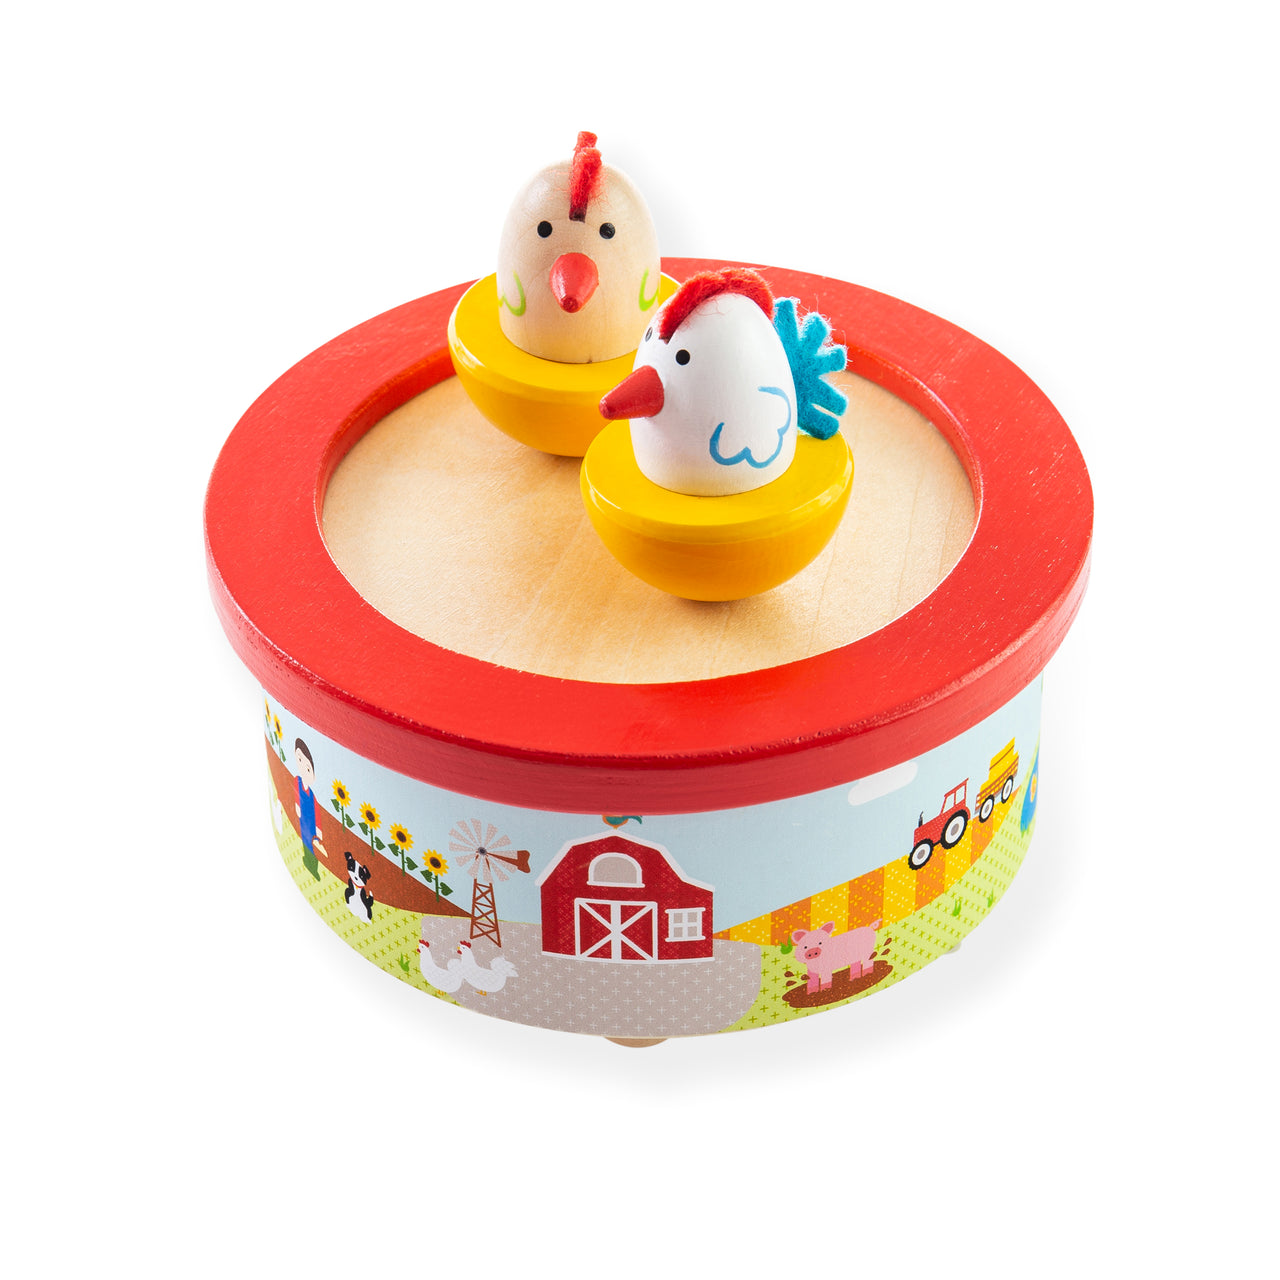 Wind them up and watch them dance with this fun wooden musical dancing toy from Bigjigs! This music box features two chickens who dance and spin on a mirrored base, providing hours of entertainment. 